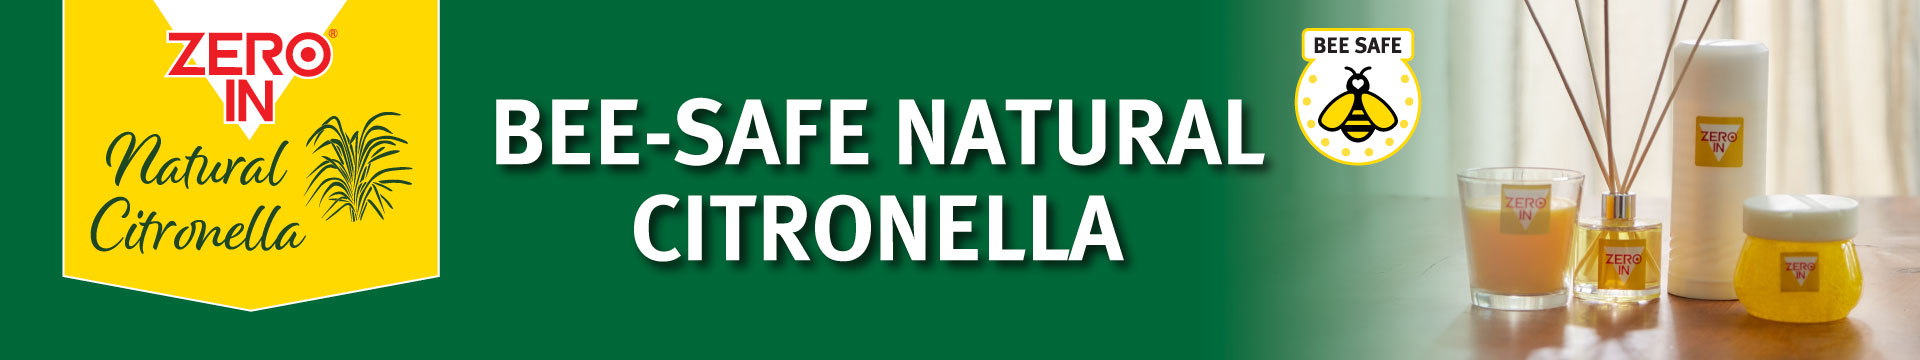 Natural-Citronella_Category_Banner